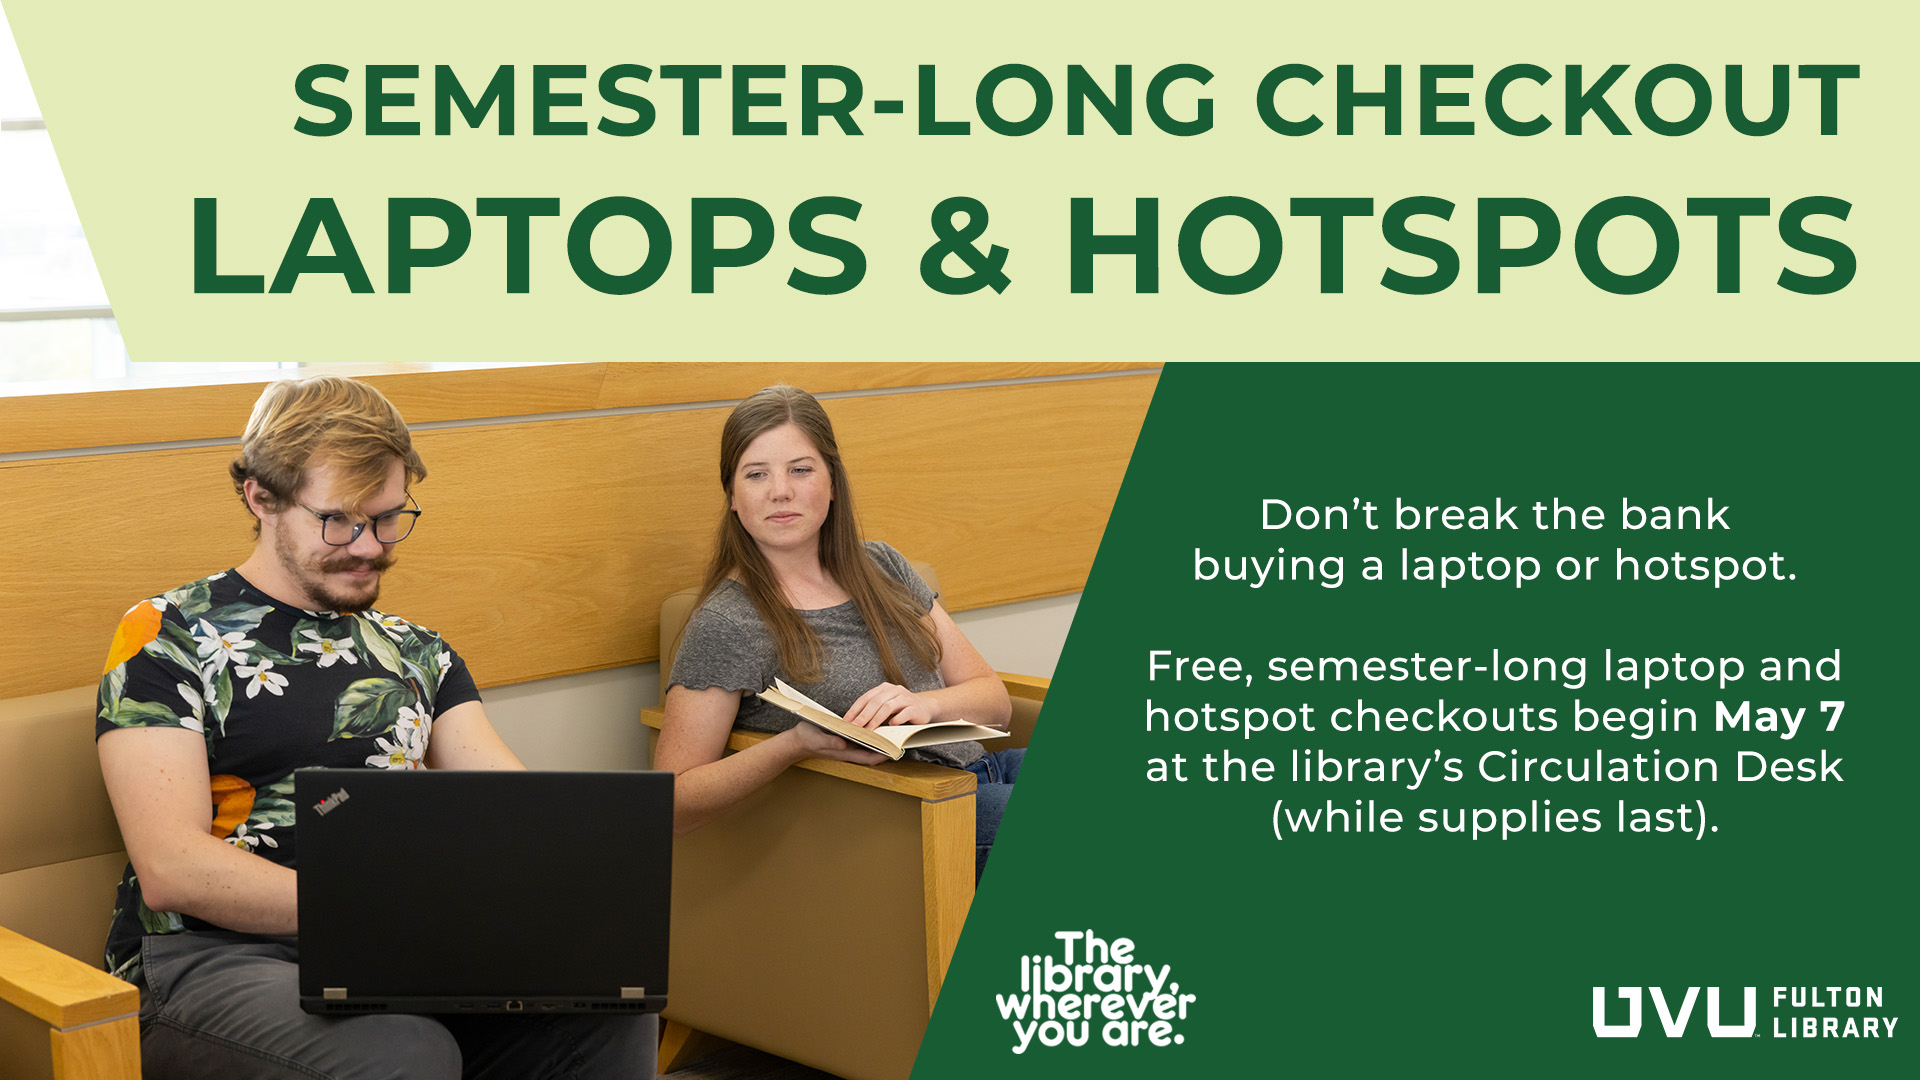 Semester-long checkout laptops & hotspots. Don't break the bank buying a laptop or hotspot. Free, semester-long laptop and hotspot checkouts begin May 7 at the library's Circulation Desk (while supplies last).